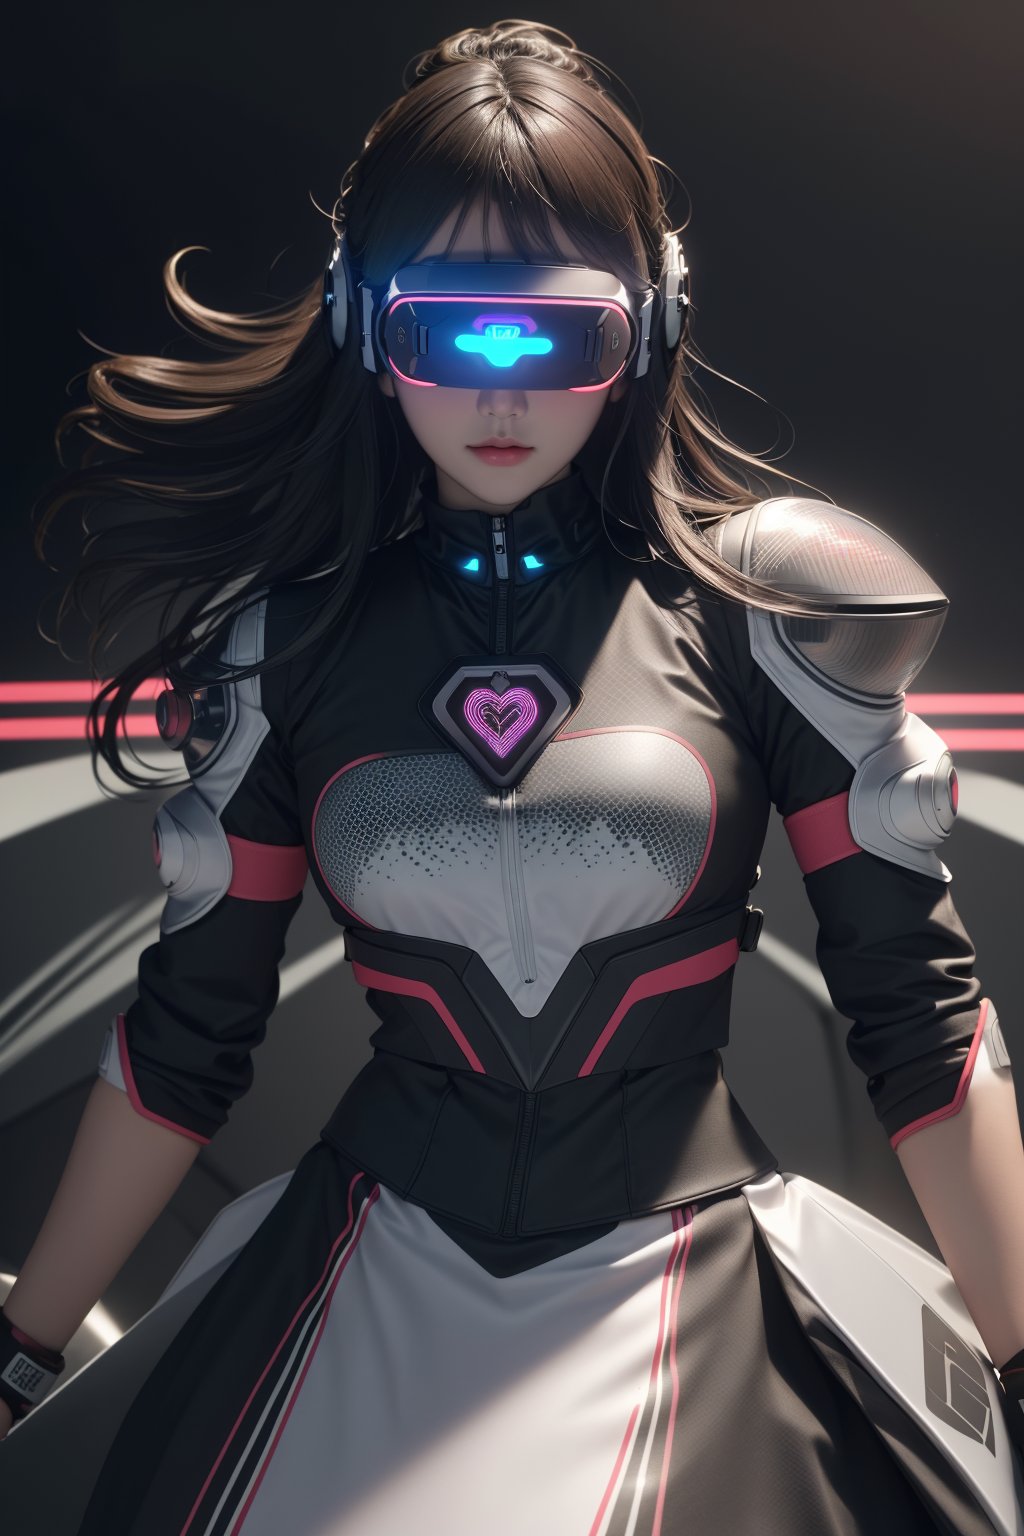 head-mounted display,  heart print,  (highly detailed:1.2),  (best quality:1.2),  detailed face,  facing the viewer,  sharp focus,  (awarded photo:1.2),  (hyper-detailed hair:1.2),  (wonderful upper body:1.2),  (dynamic stance:1.2),  (hyperrealistic:1.2),  dramatic lighting,  (highly detailed futuristic cityscape:1.2),  (sci-fi:1.2),  professional photograph,<lora:EMS-105543-EMS:0.800000>